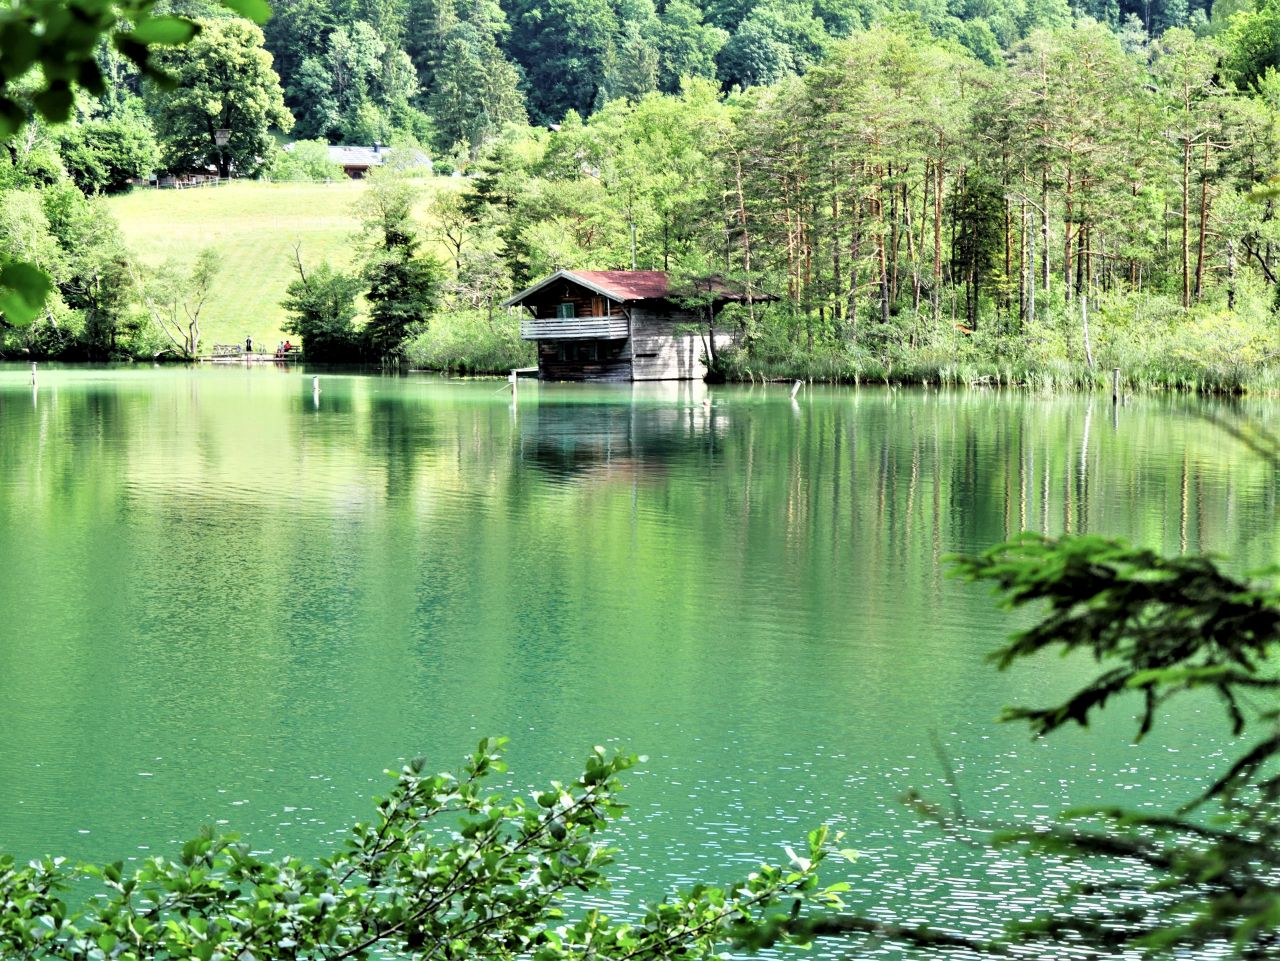 Thumsee